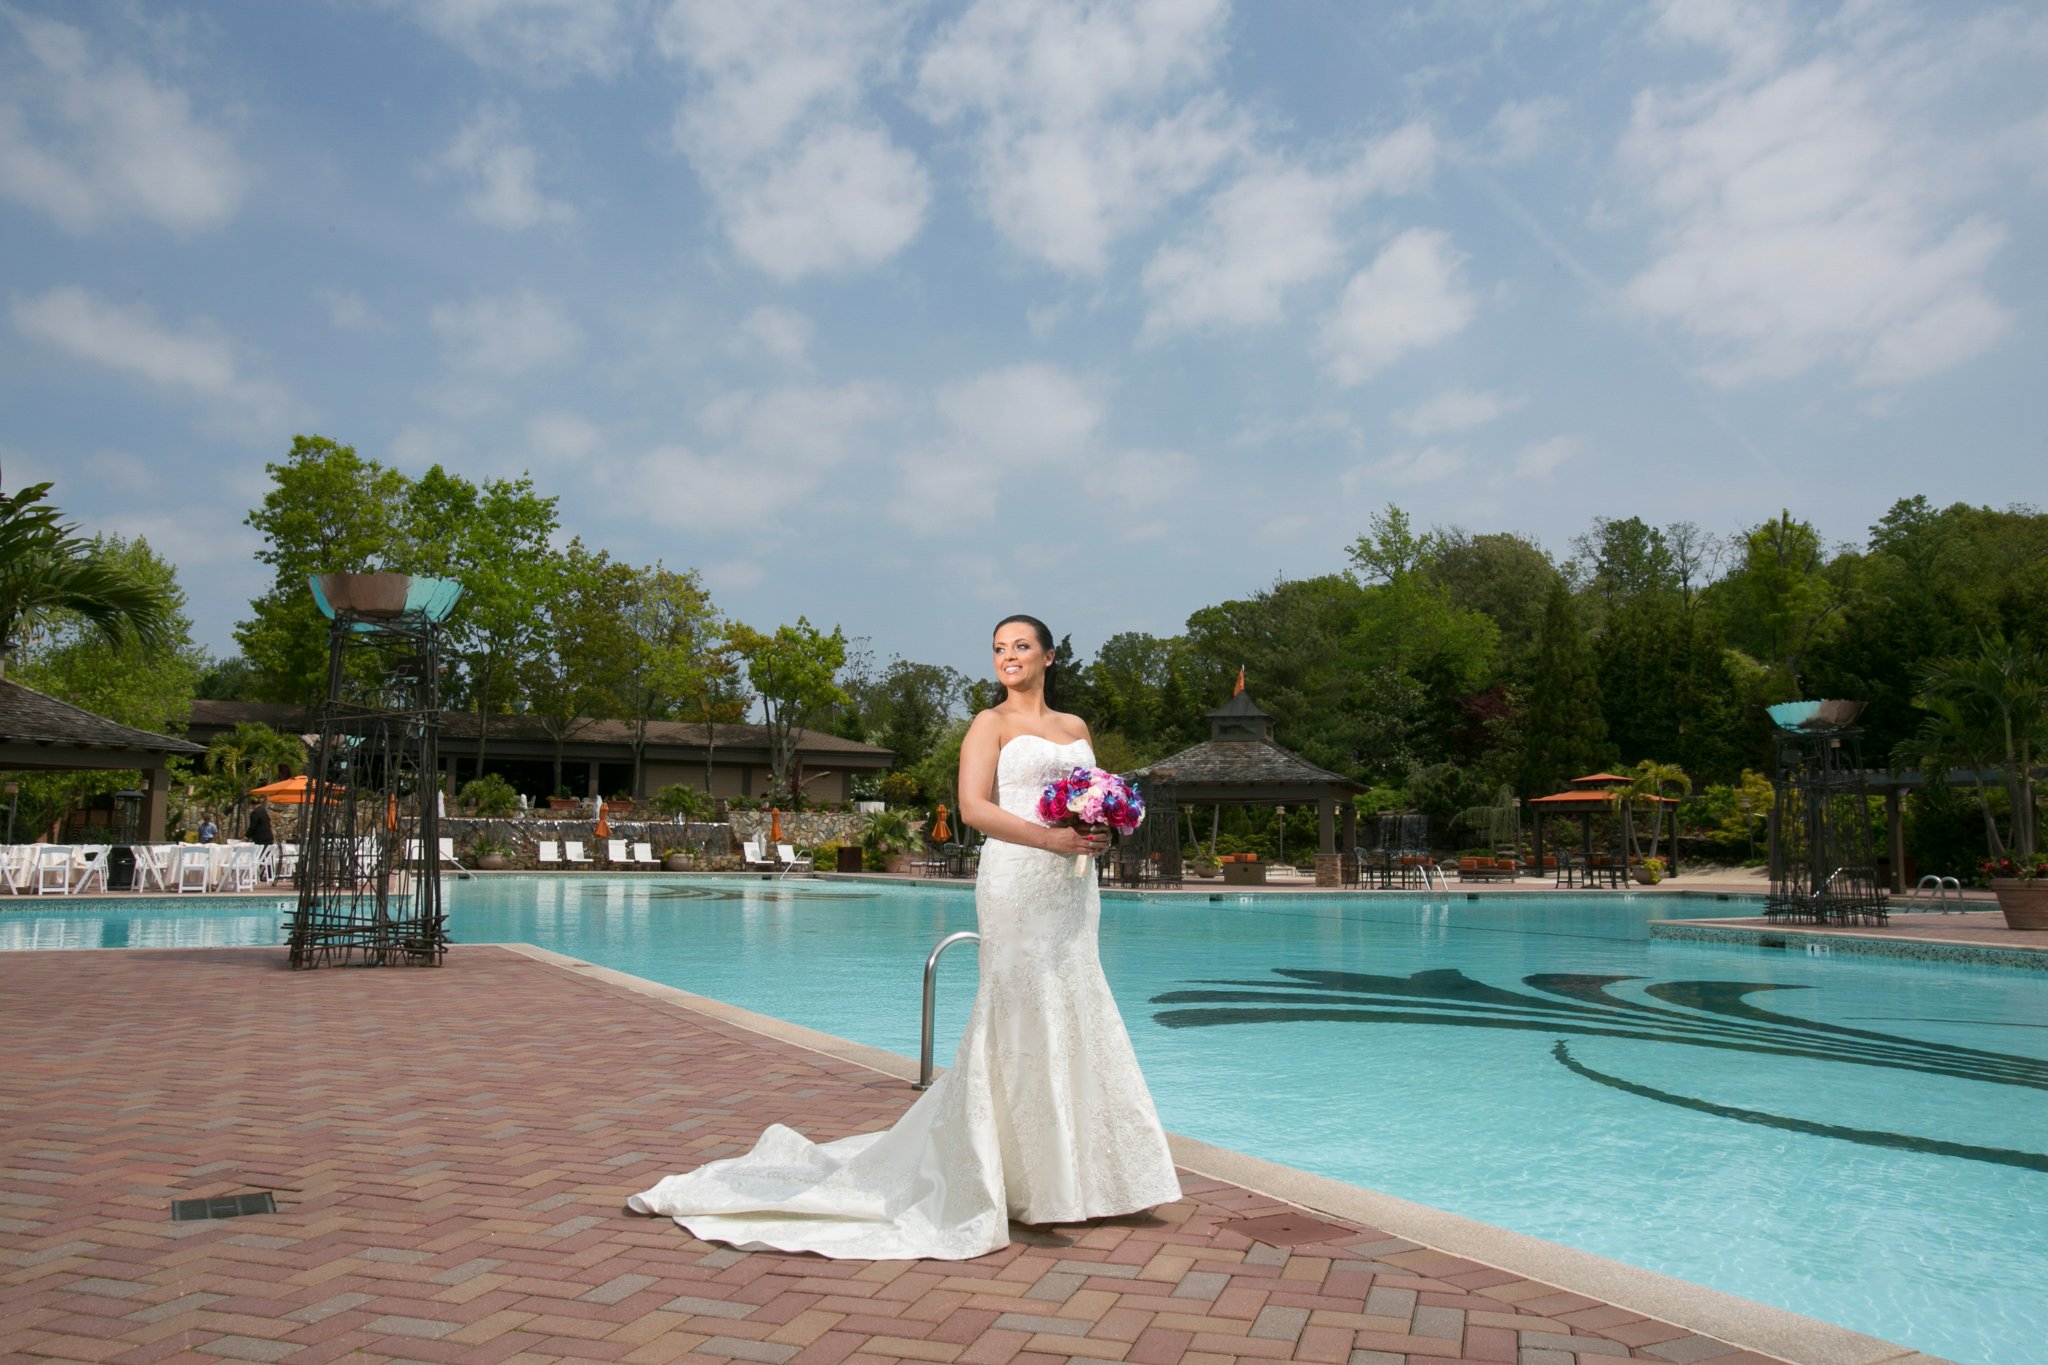 Poolside at Crest Hollow Wedding Photos-2